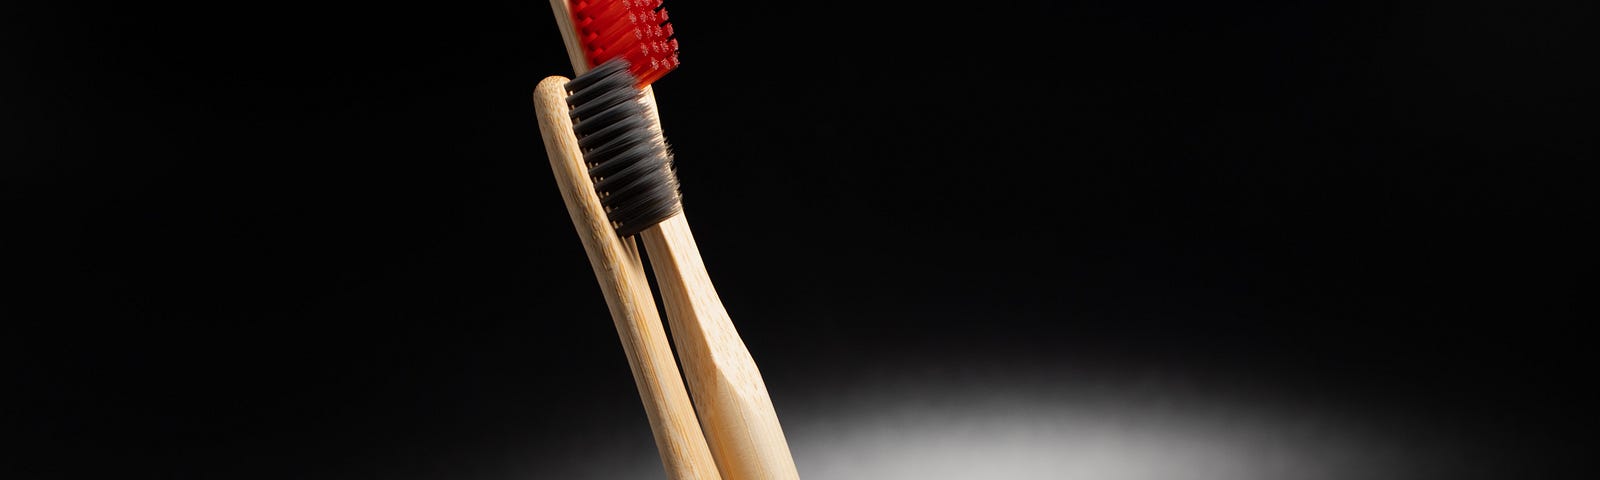 Two toothbrushes in a pot